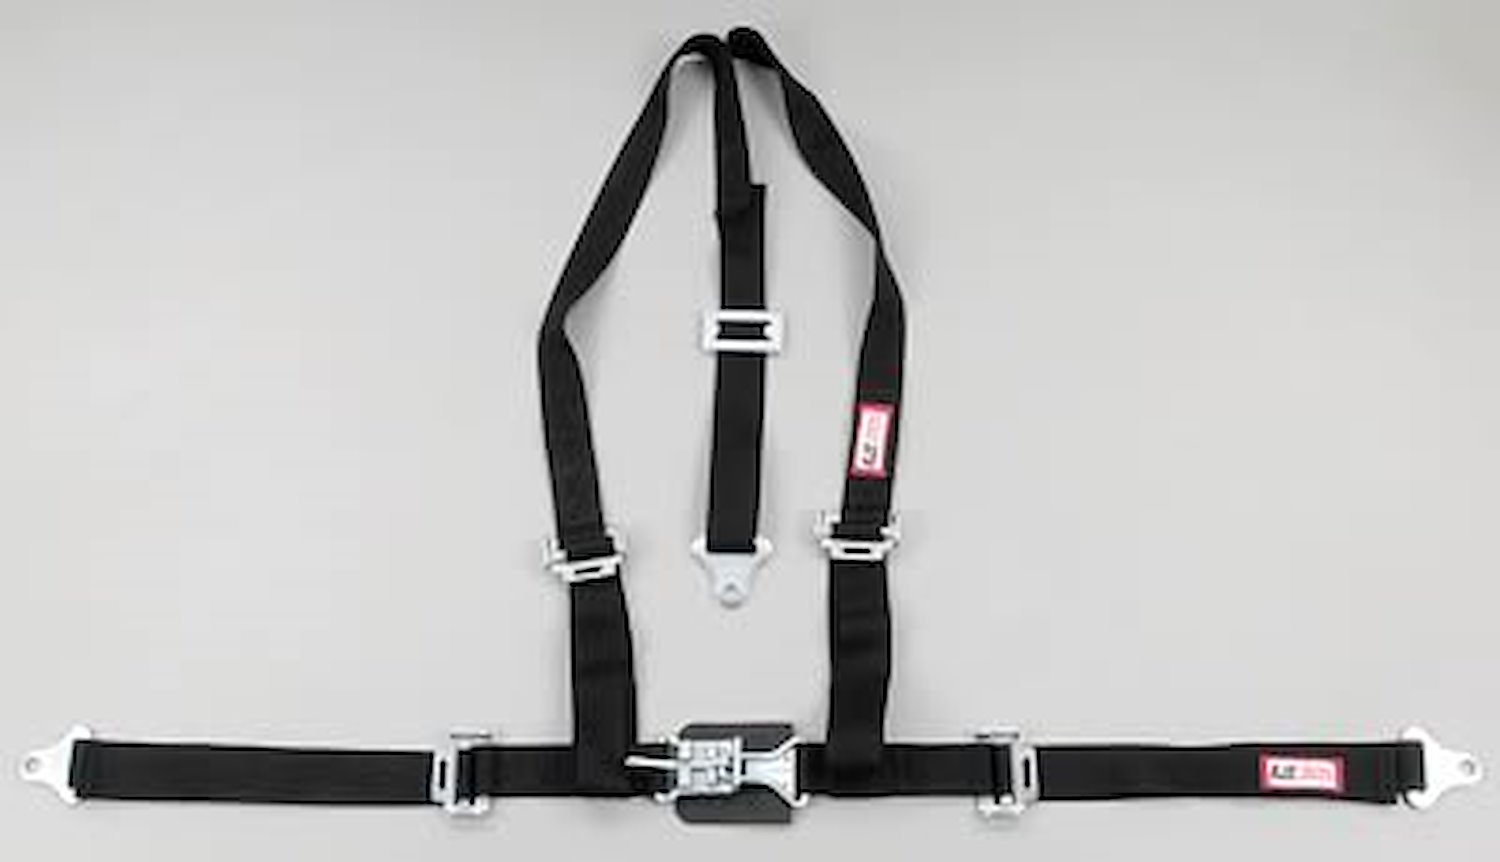 NON-SFI L&L HARNESS 3 PULL UP Lap Belt SNAP SEWN IN 2 S.H. Individual FLOOR Mount WRAP/BOLT BLACK